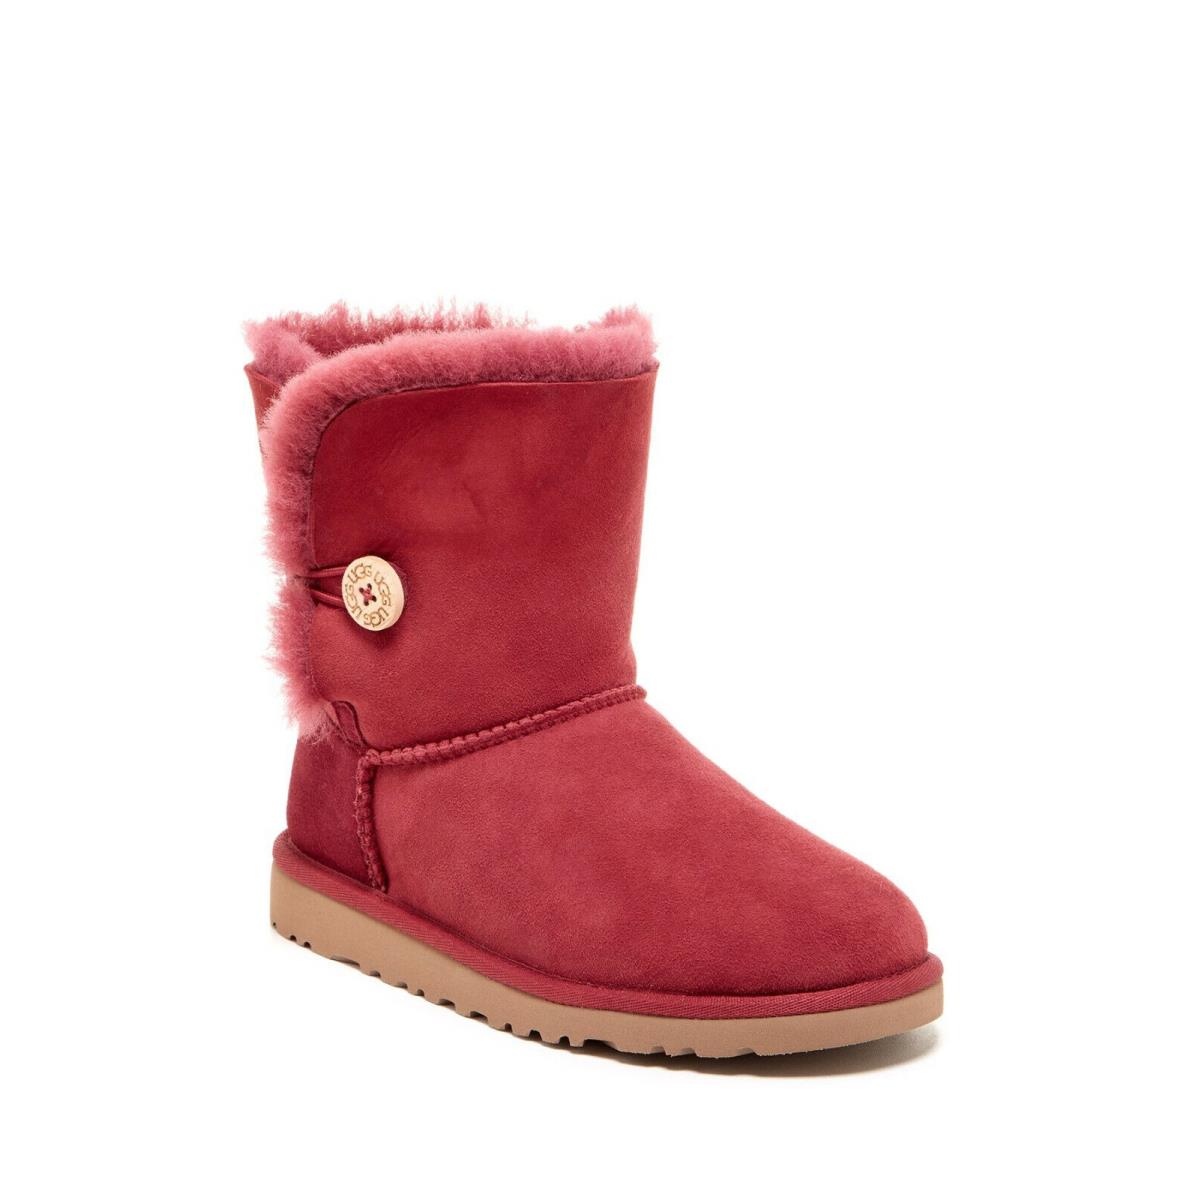 Girl Ugg Australia Bailey Button Boots Red Twinface Sheepskin 5991 Youth Size